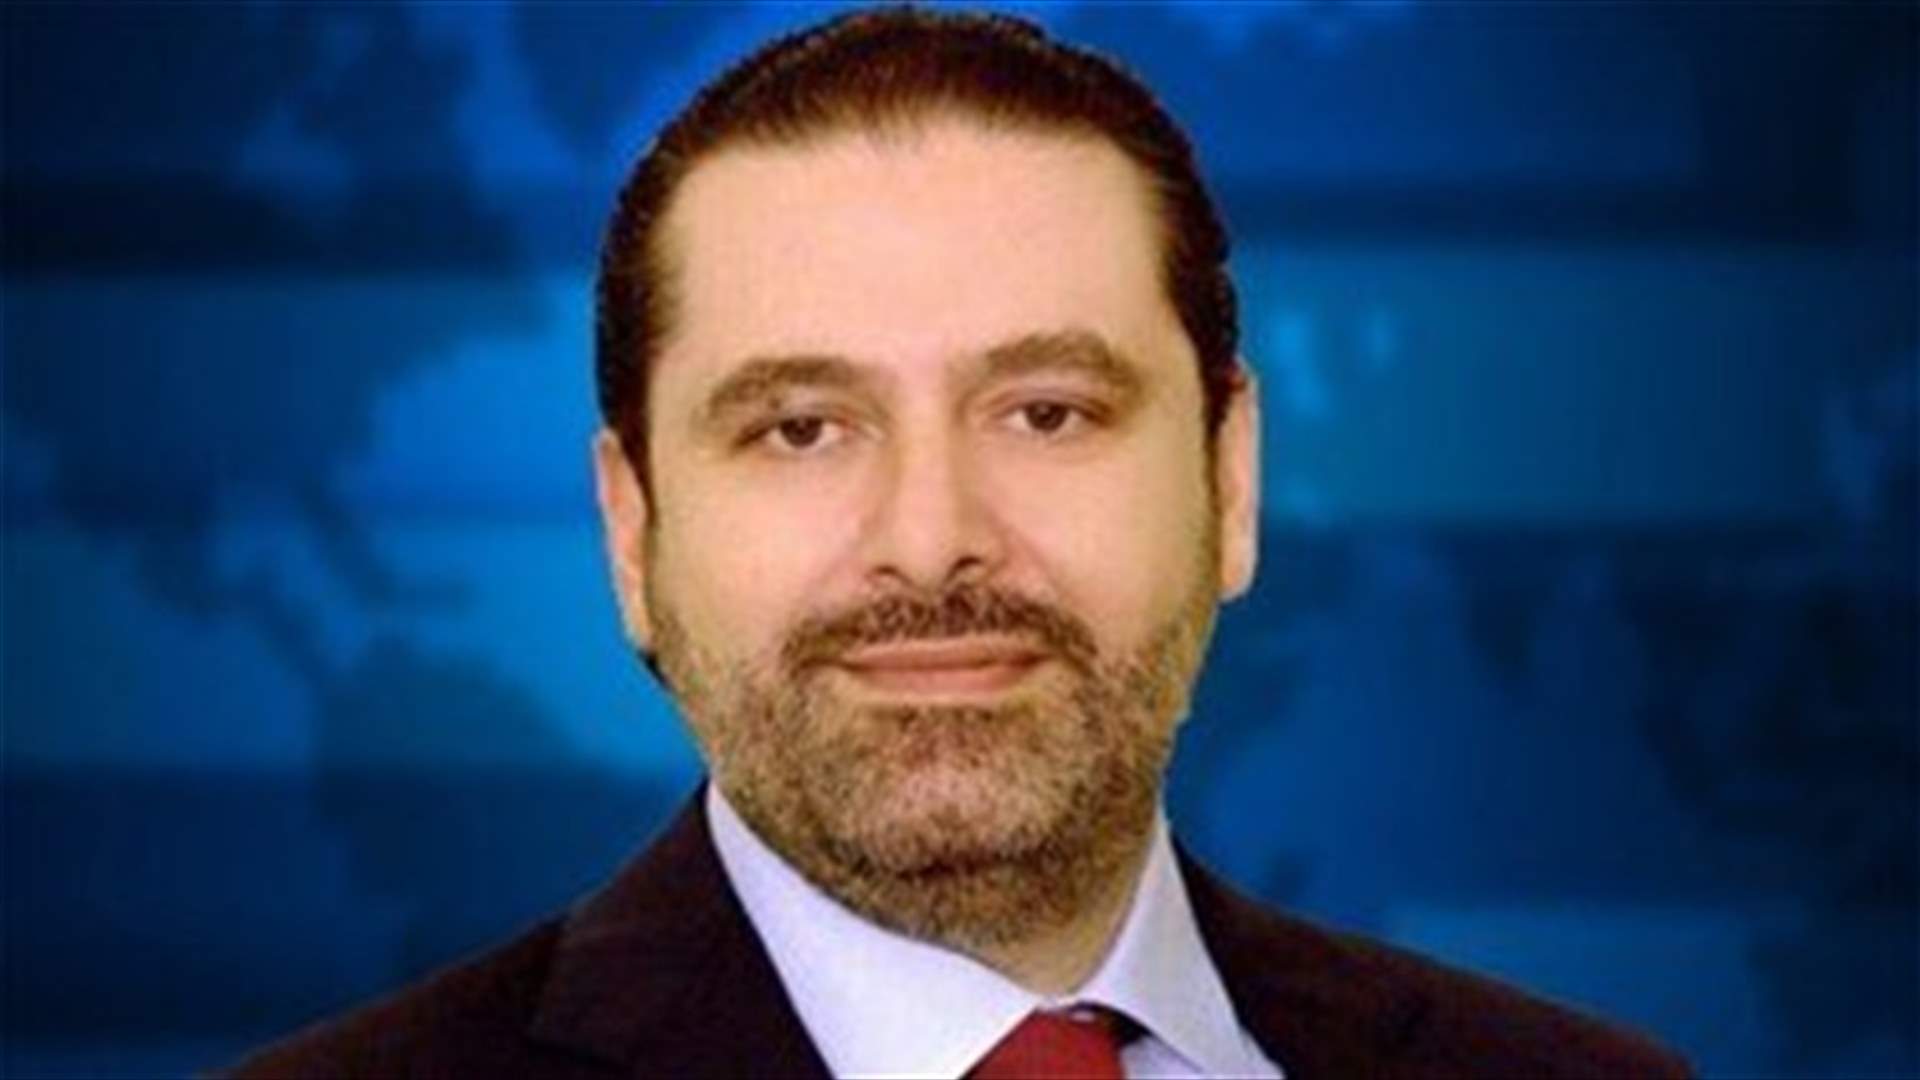 Caretaker PM Hariri: New government needed urgently to avoid collapse